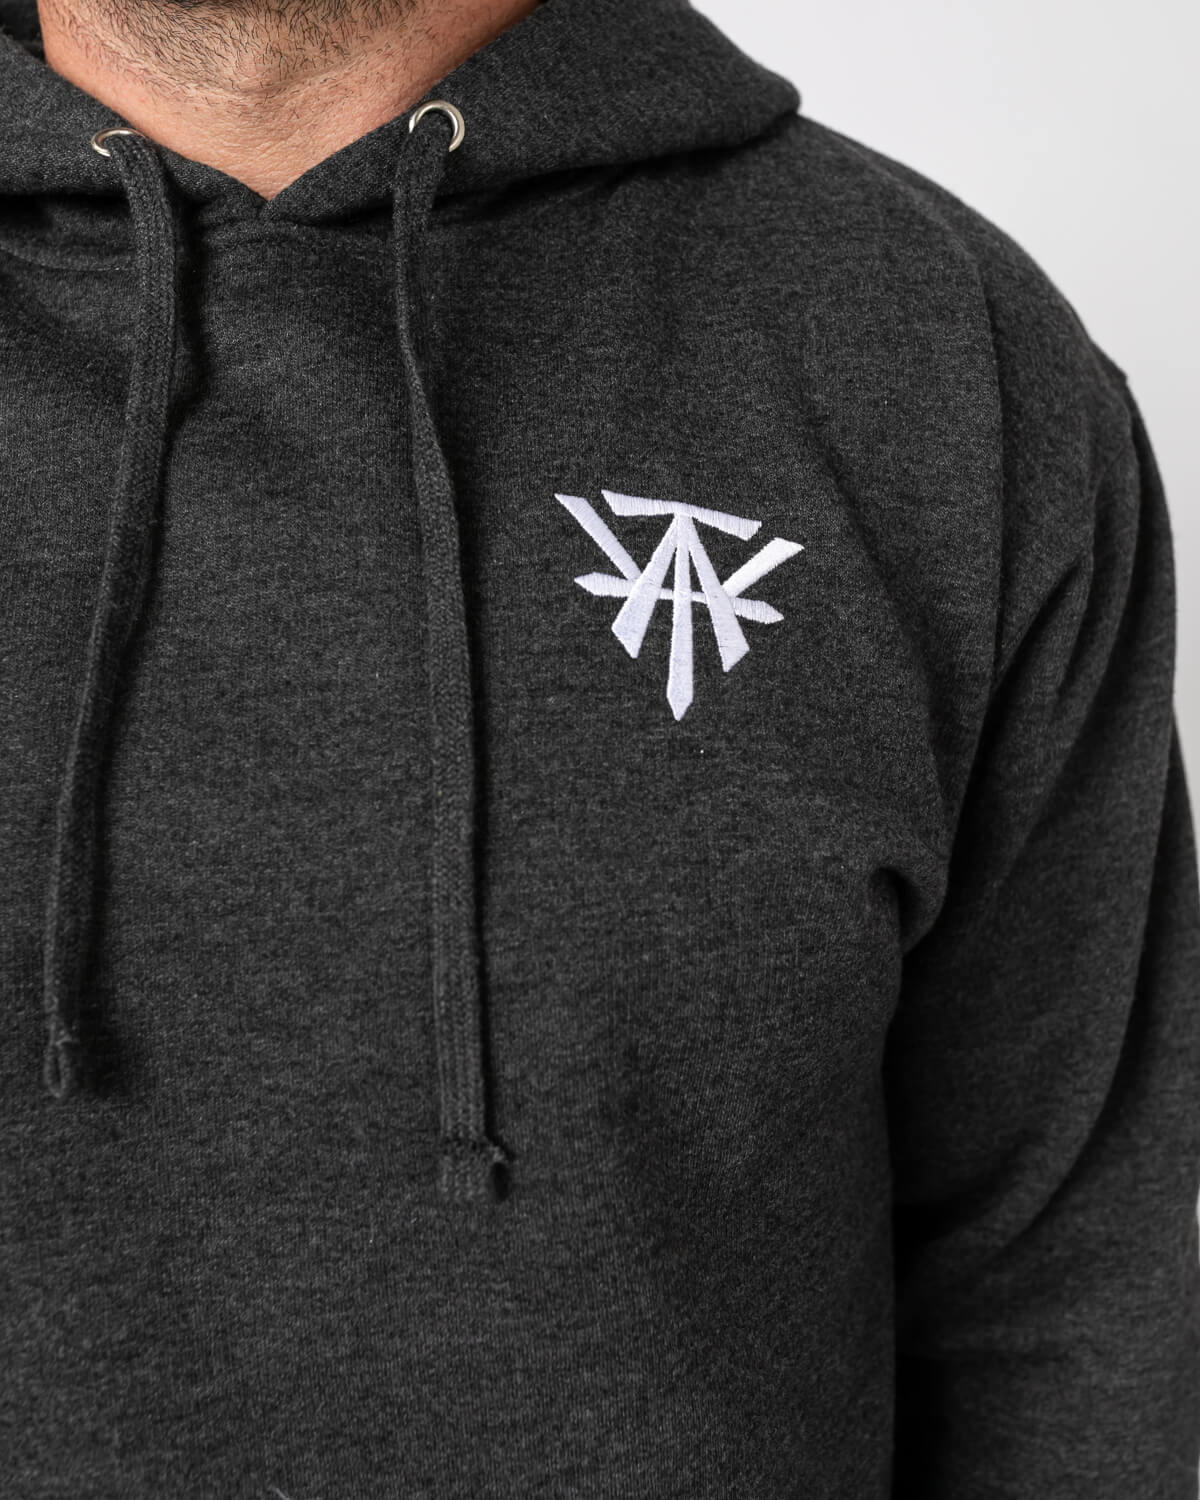 Heather Gray Hoodie with White Pocket Embroidery Logo